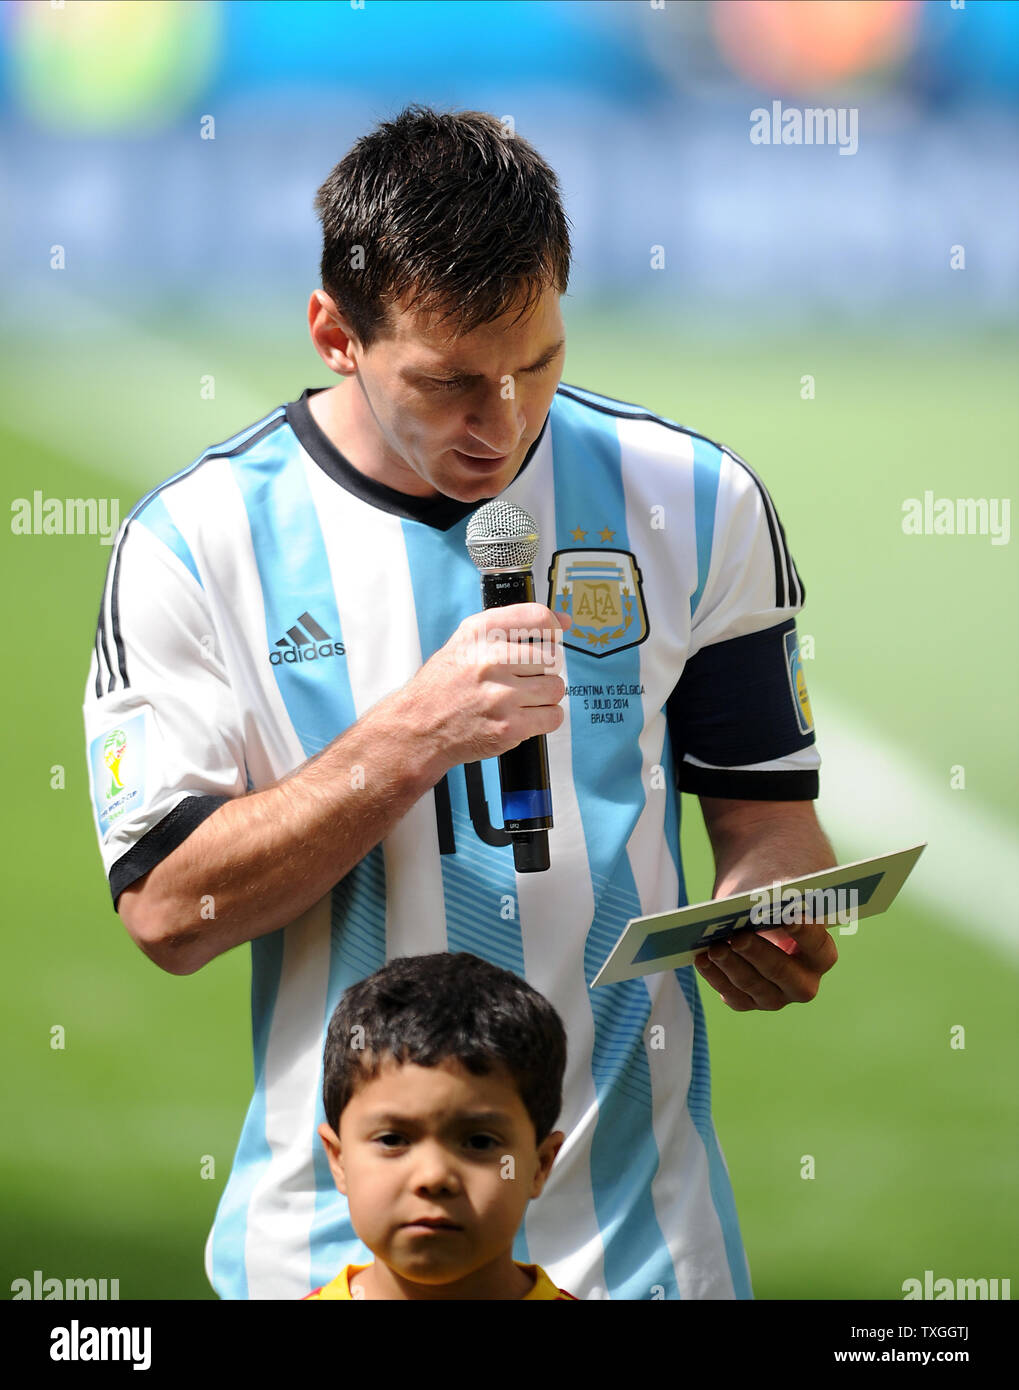 Lionel Messi of Argentina speaks to the crowd ahead of the 2014 FIFA World Cup Quarter Final match at the Estadio Nacional in Brasilia, Brazil on July 05, 2014. UPI/Chris Brunskill Stock Photo